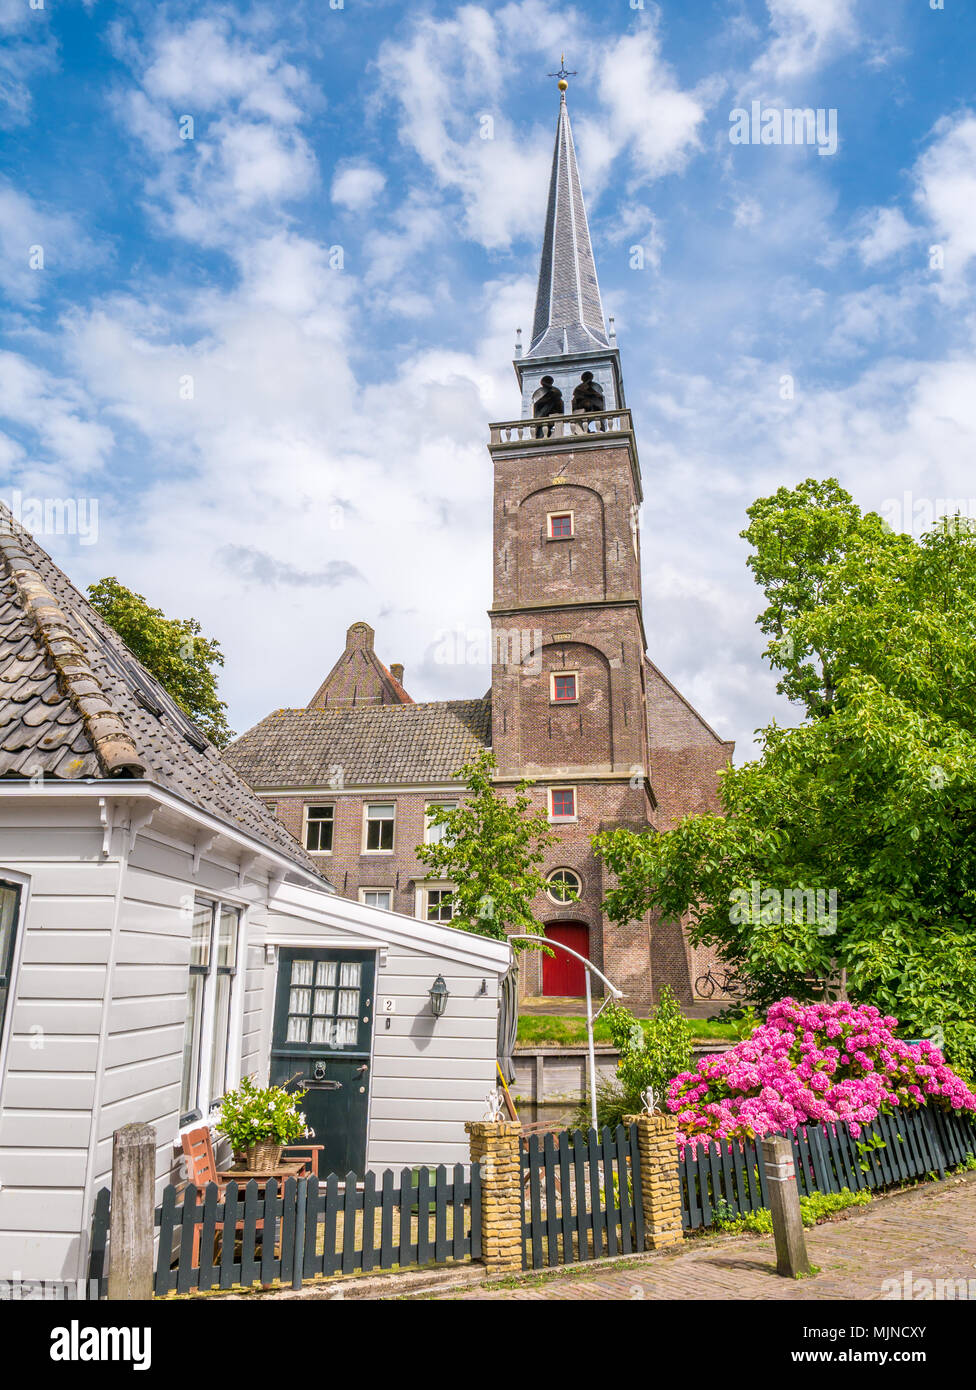 Street scene with church tower and part of wooden house in historic old town of Broek in Waterland, Noord-Holland, Netherlands Stock Photo